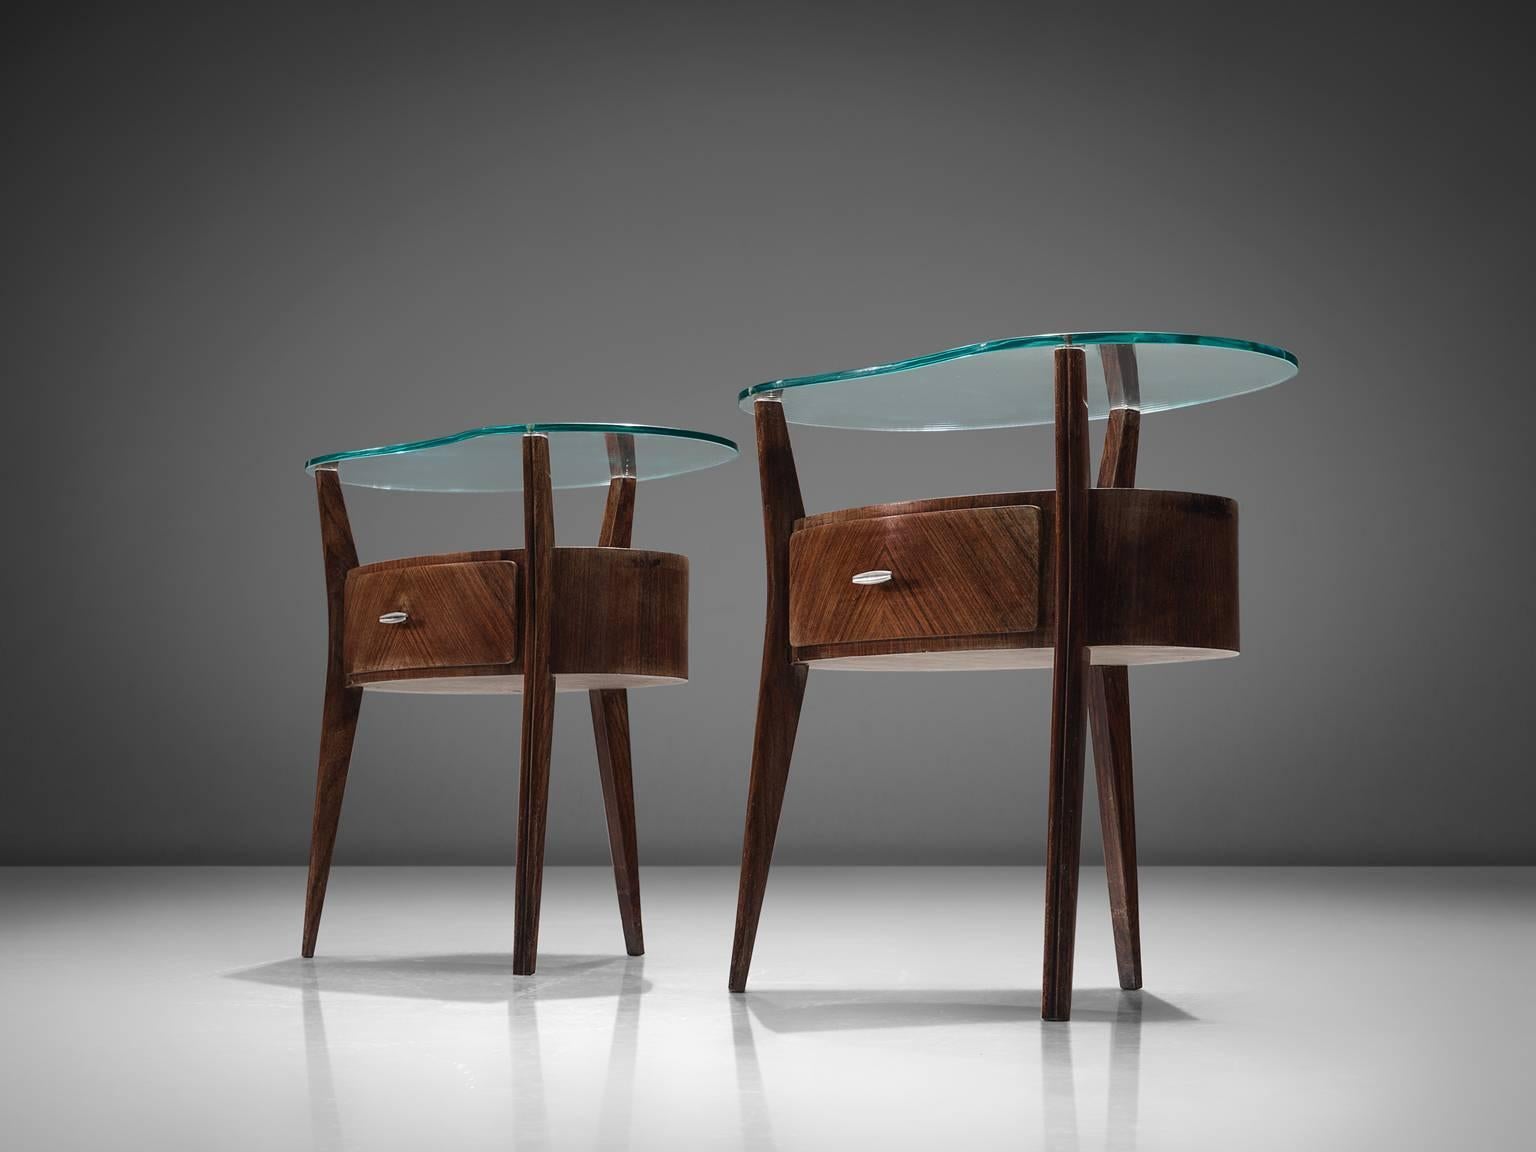 Nightstands, mahogany, glass and metal, Italy, 1950s.

These two side tables or nightstands are refined and soft-edged. The cabinets feature three legs and the main body features a drawer. The free-formed glass top rests on the three legs that